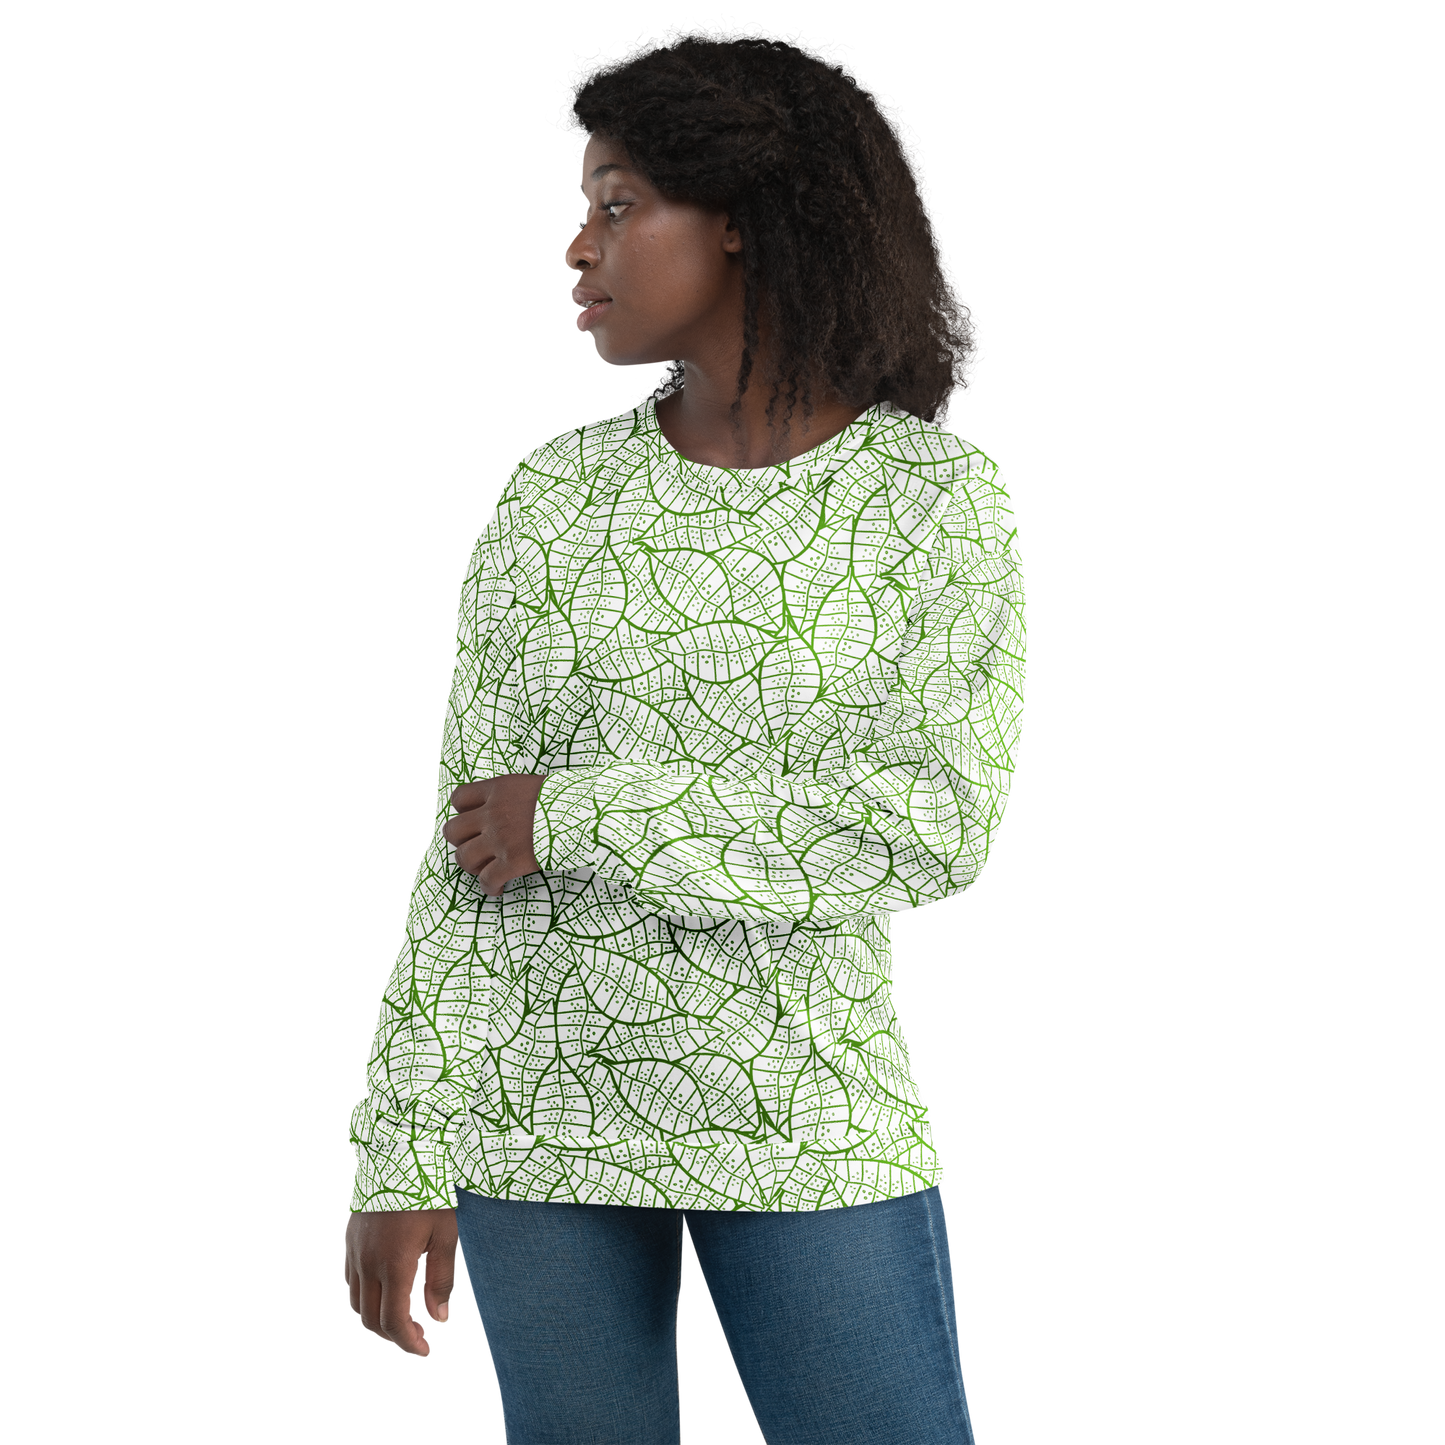 Colorful Fall Leaves | Seamless Patterns | All-Over Print Unisex Sweatshirt - #4